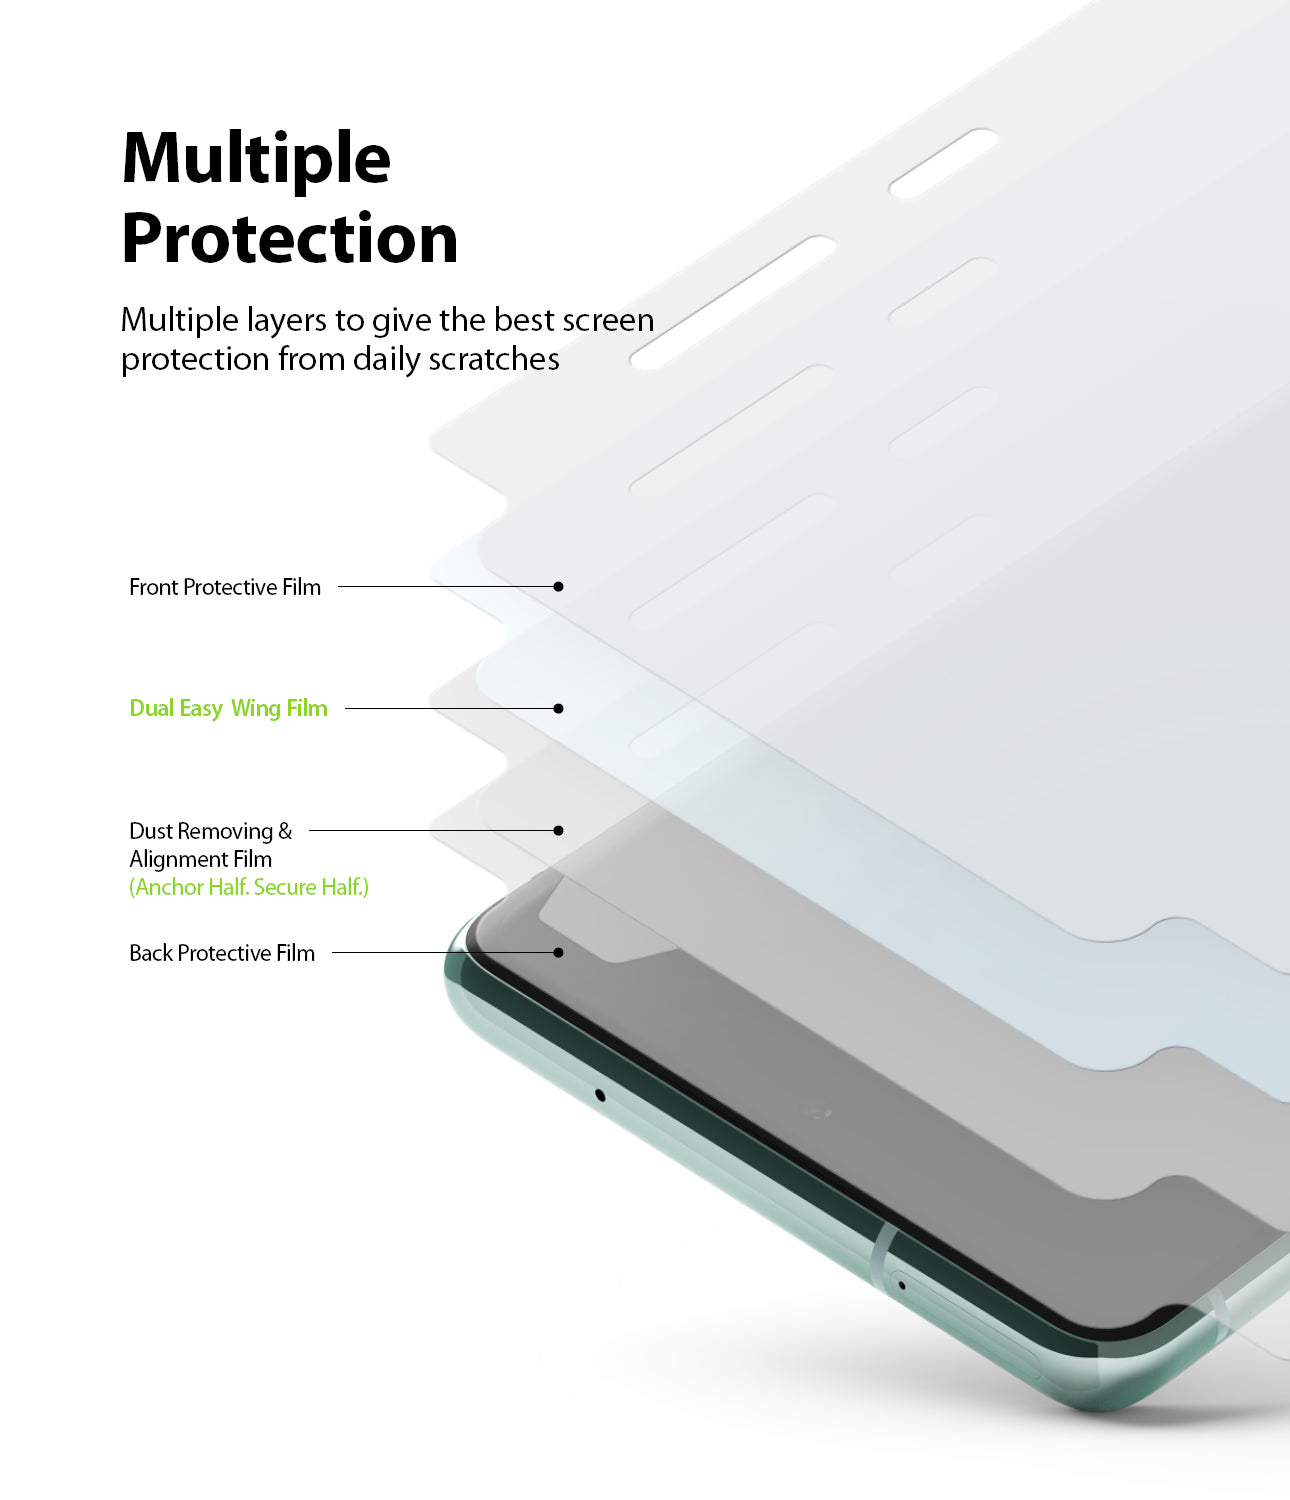 multiple layers to give the best screen protection from daily scratches